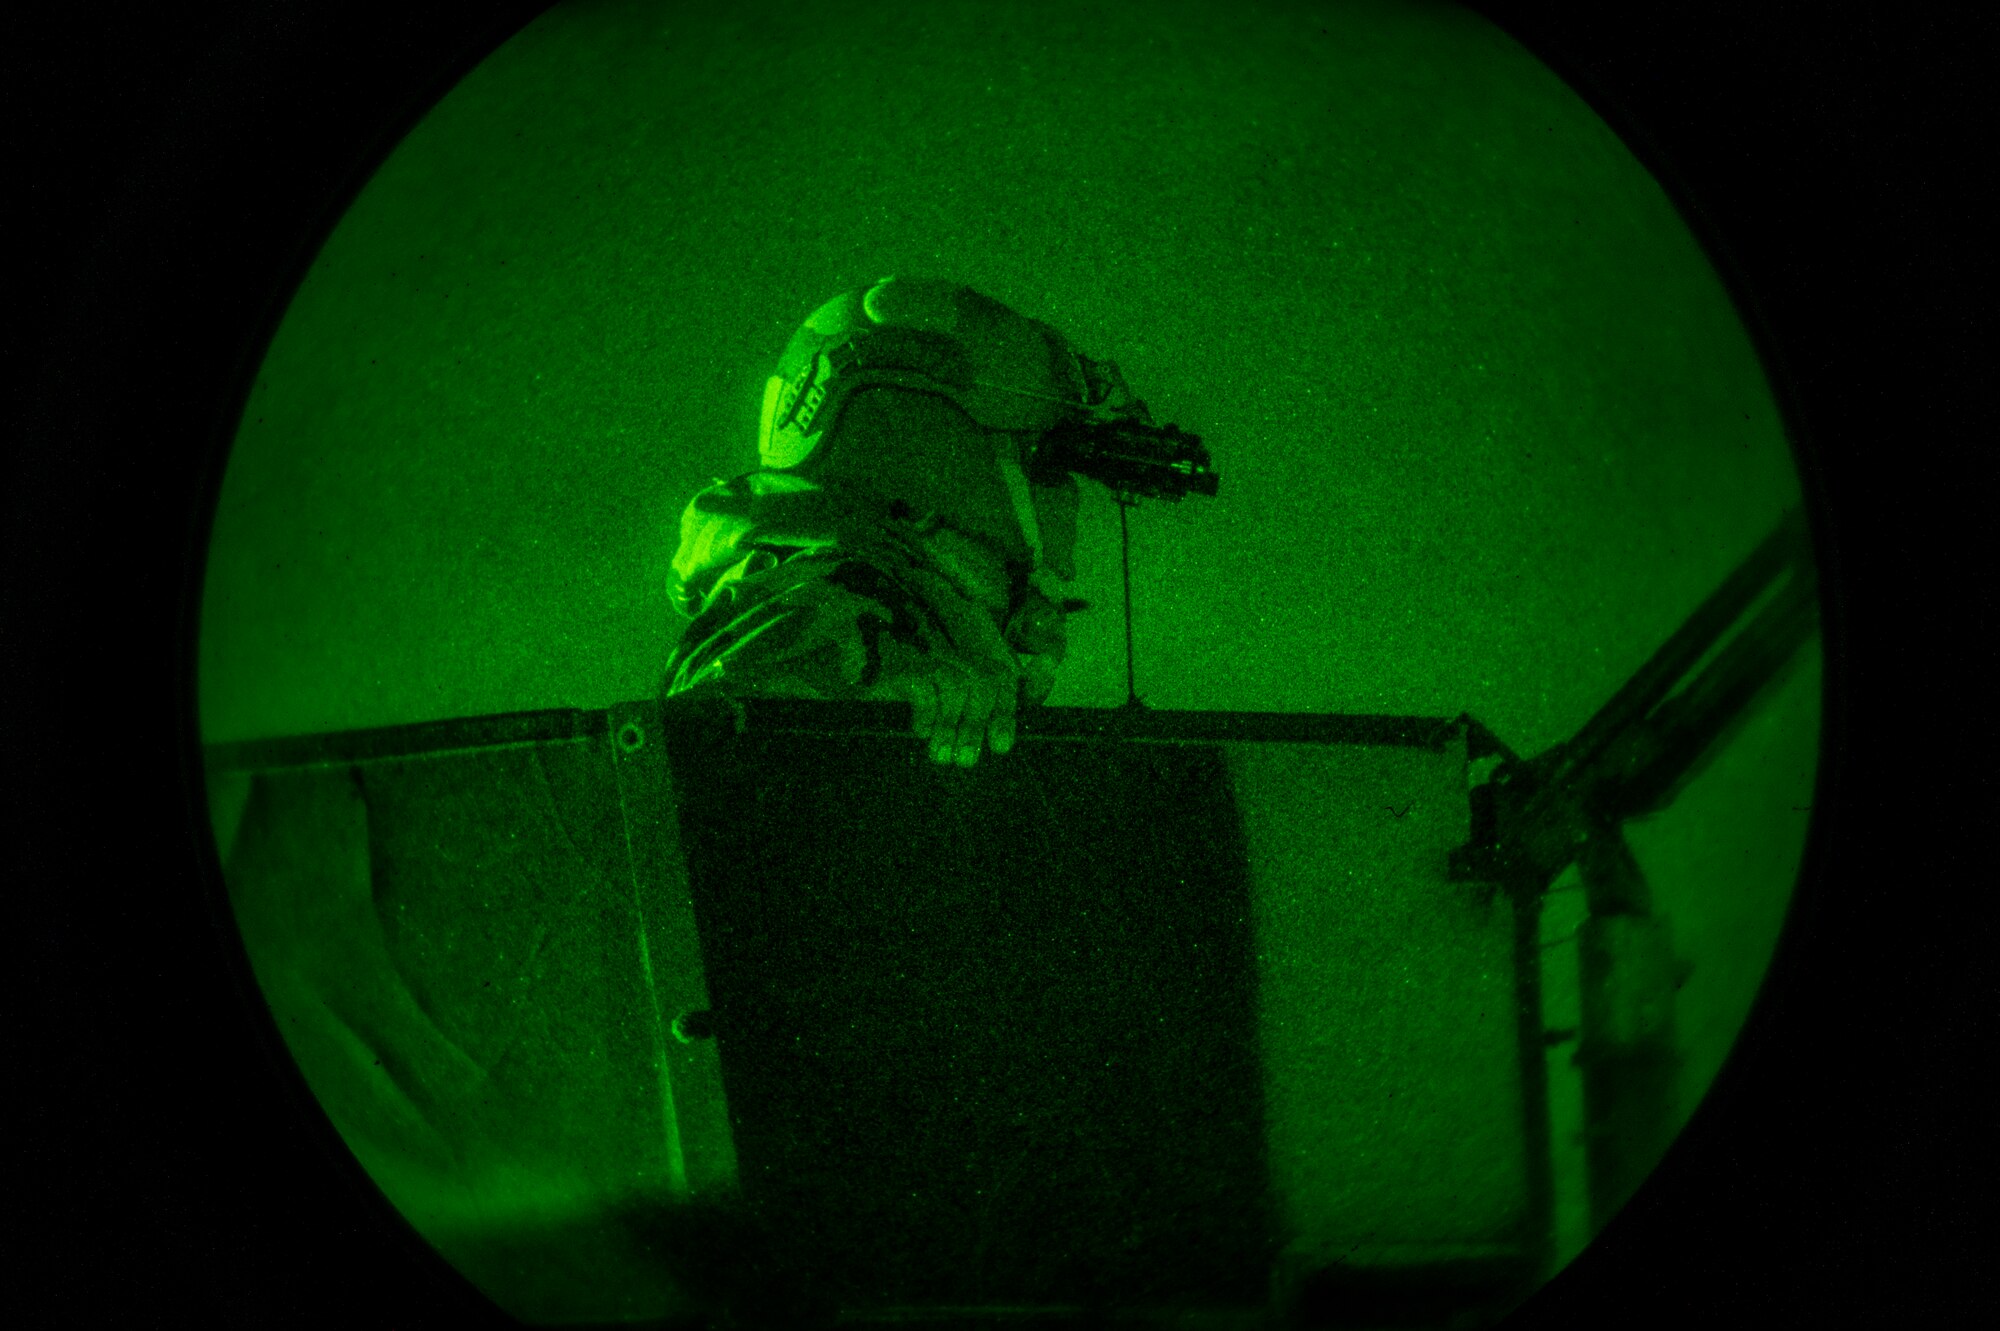 U.S. Air Force Airman 1st Class Will Dorvilier, 51st Security Forces Squadron Defender, scans for simulated opposing forces during a night-time defend-the-base training scenario at Osan Air Base, Republic of Korea, Jan. 31 2023. As a Humvee gunner, Dorvilier is responsible for providing the first line of defense for the vehicle and his team through surveillance, target acquisition, and engagement of opposing forces with lethal force. (U.S. Air Force photo by Airman 1st Class Aaron Edwards)